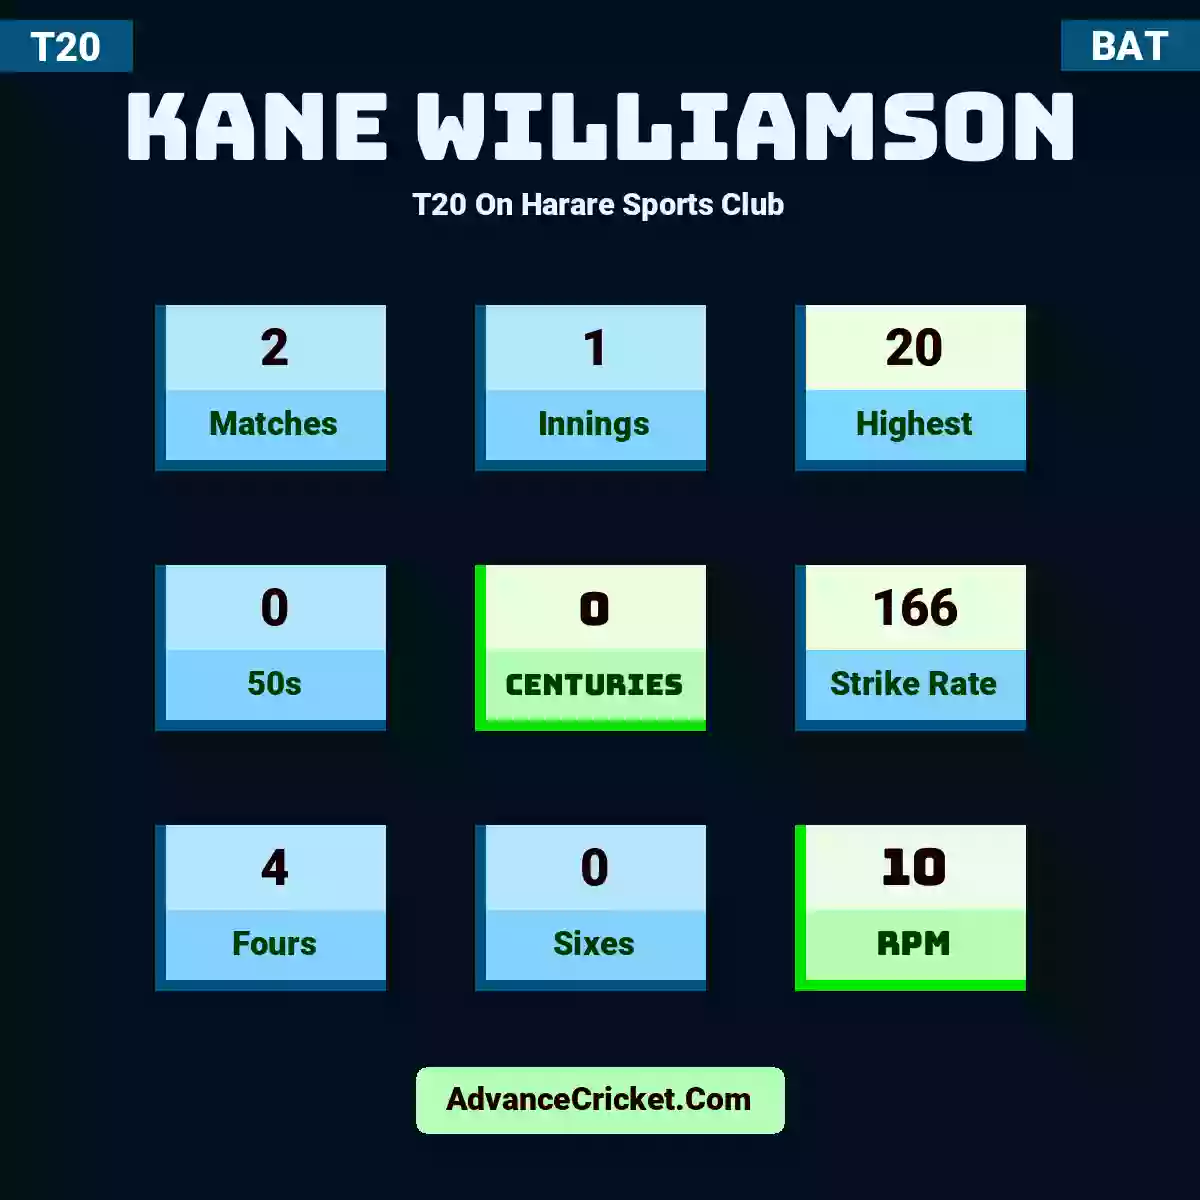 Kane Williamson T20  On Harare Sports Club, Kane Williamson played 2 matches, scored 20 runs as highest, 0 half-centuries, and 0 centuries, with a strike rate of 166. K.Williamson hit 4 fours and 0 sixes, with an RPM of 10.